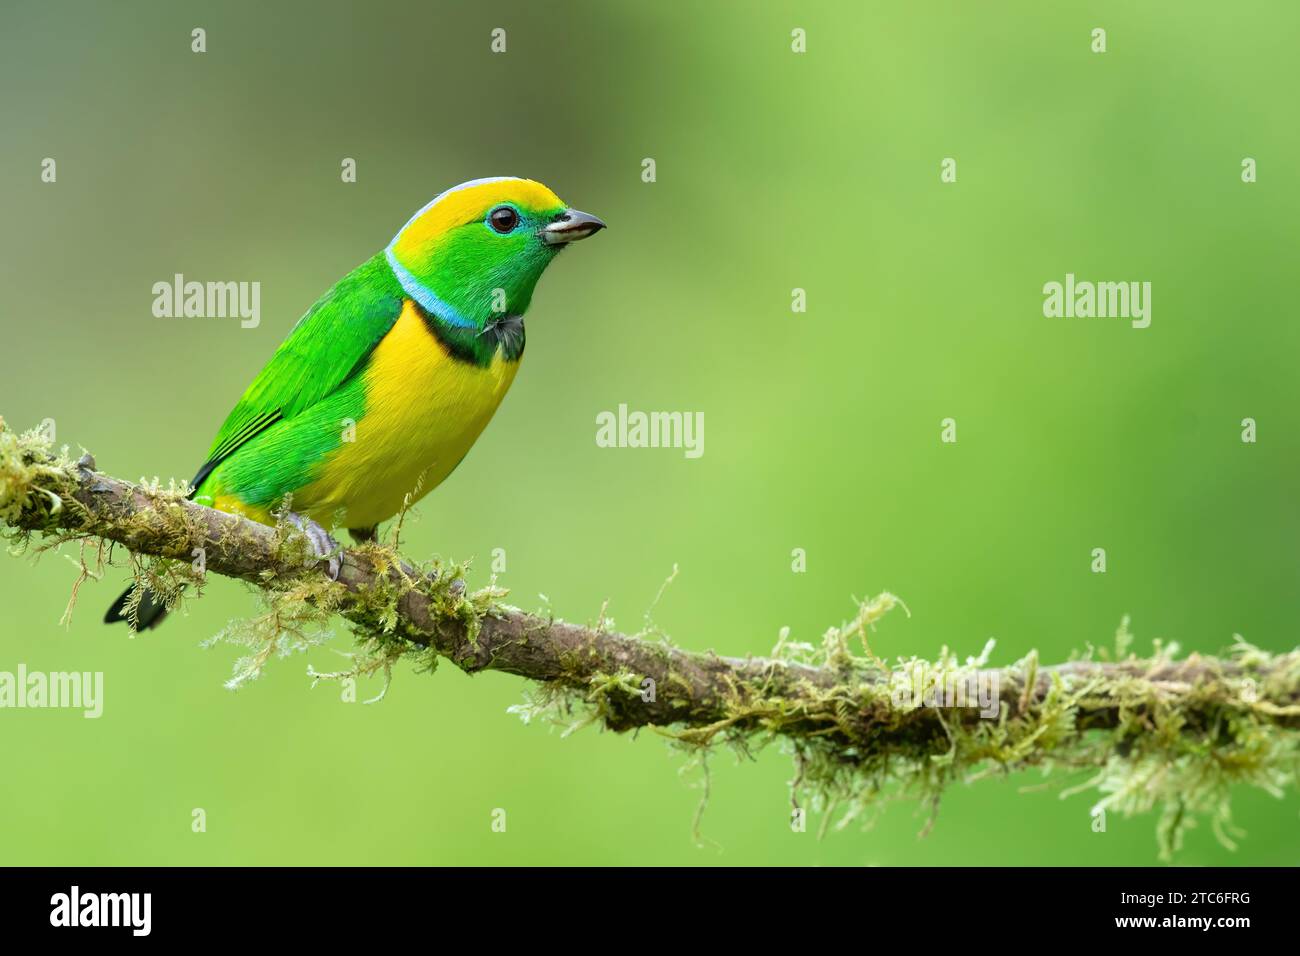 Golden-browed chlorophonia (Chlorophonia callophrys) is a species of bird in the family Fringillidae. It is found in Costa Rica and Panama. Stock Photo